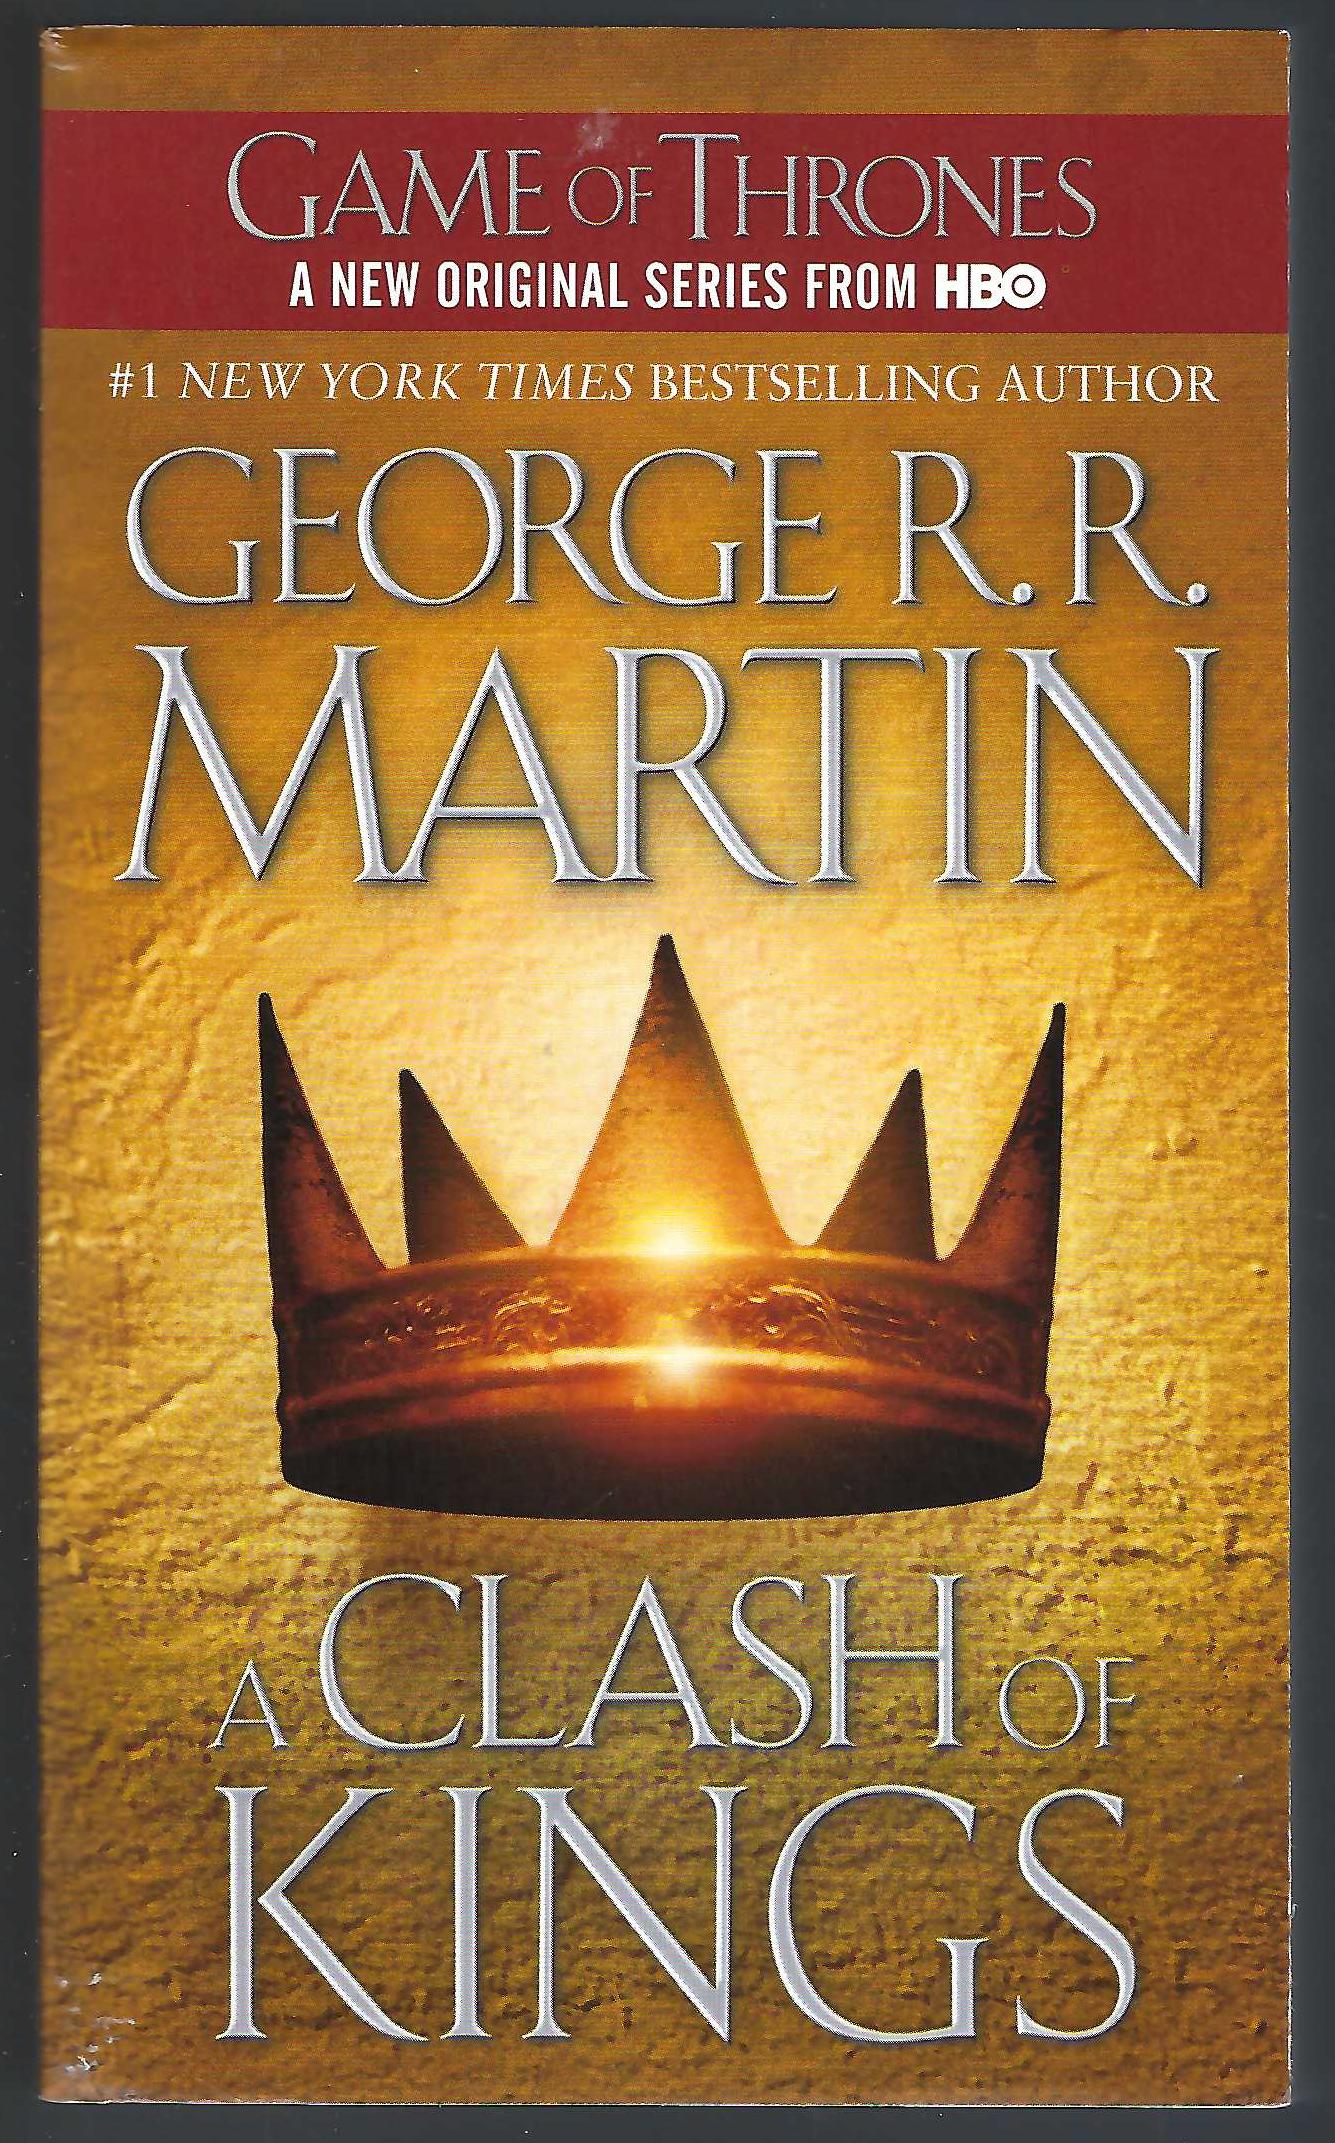 A Game of Thrones & A Clash of Kings, George RR Martin, Bantam covers